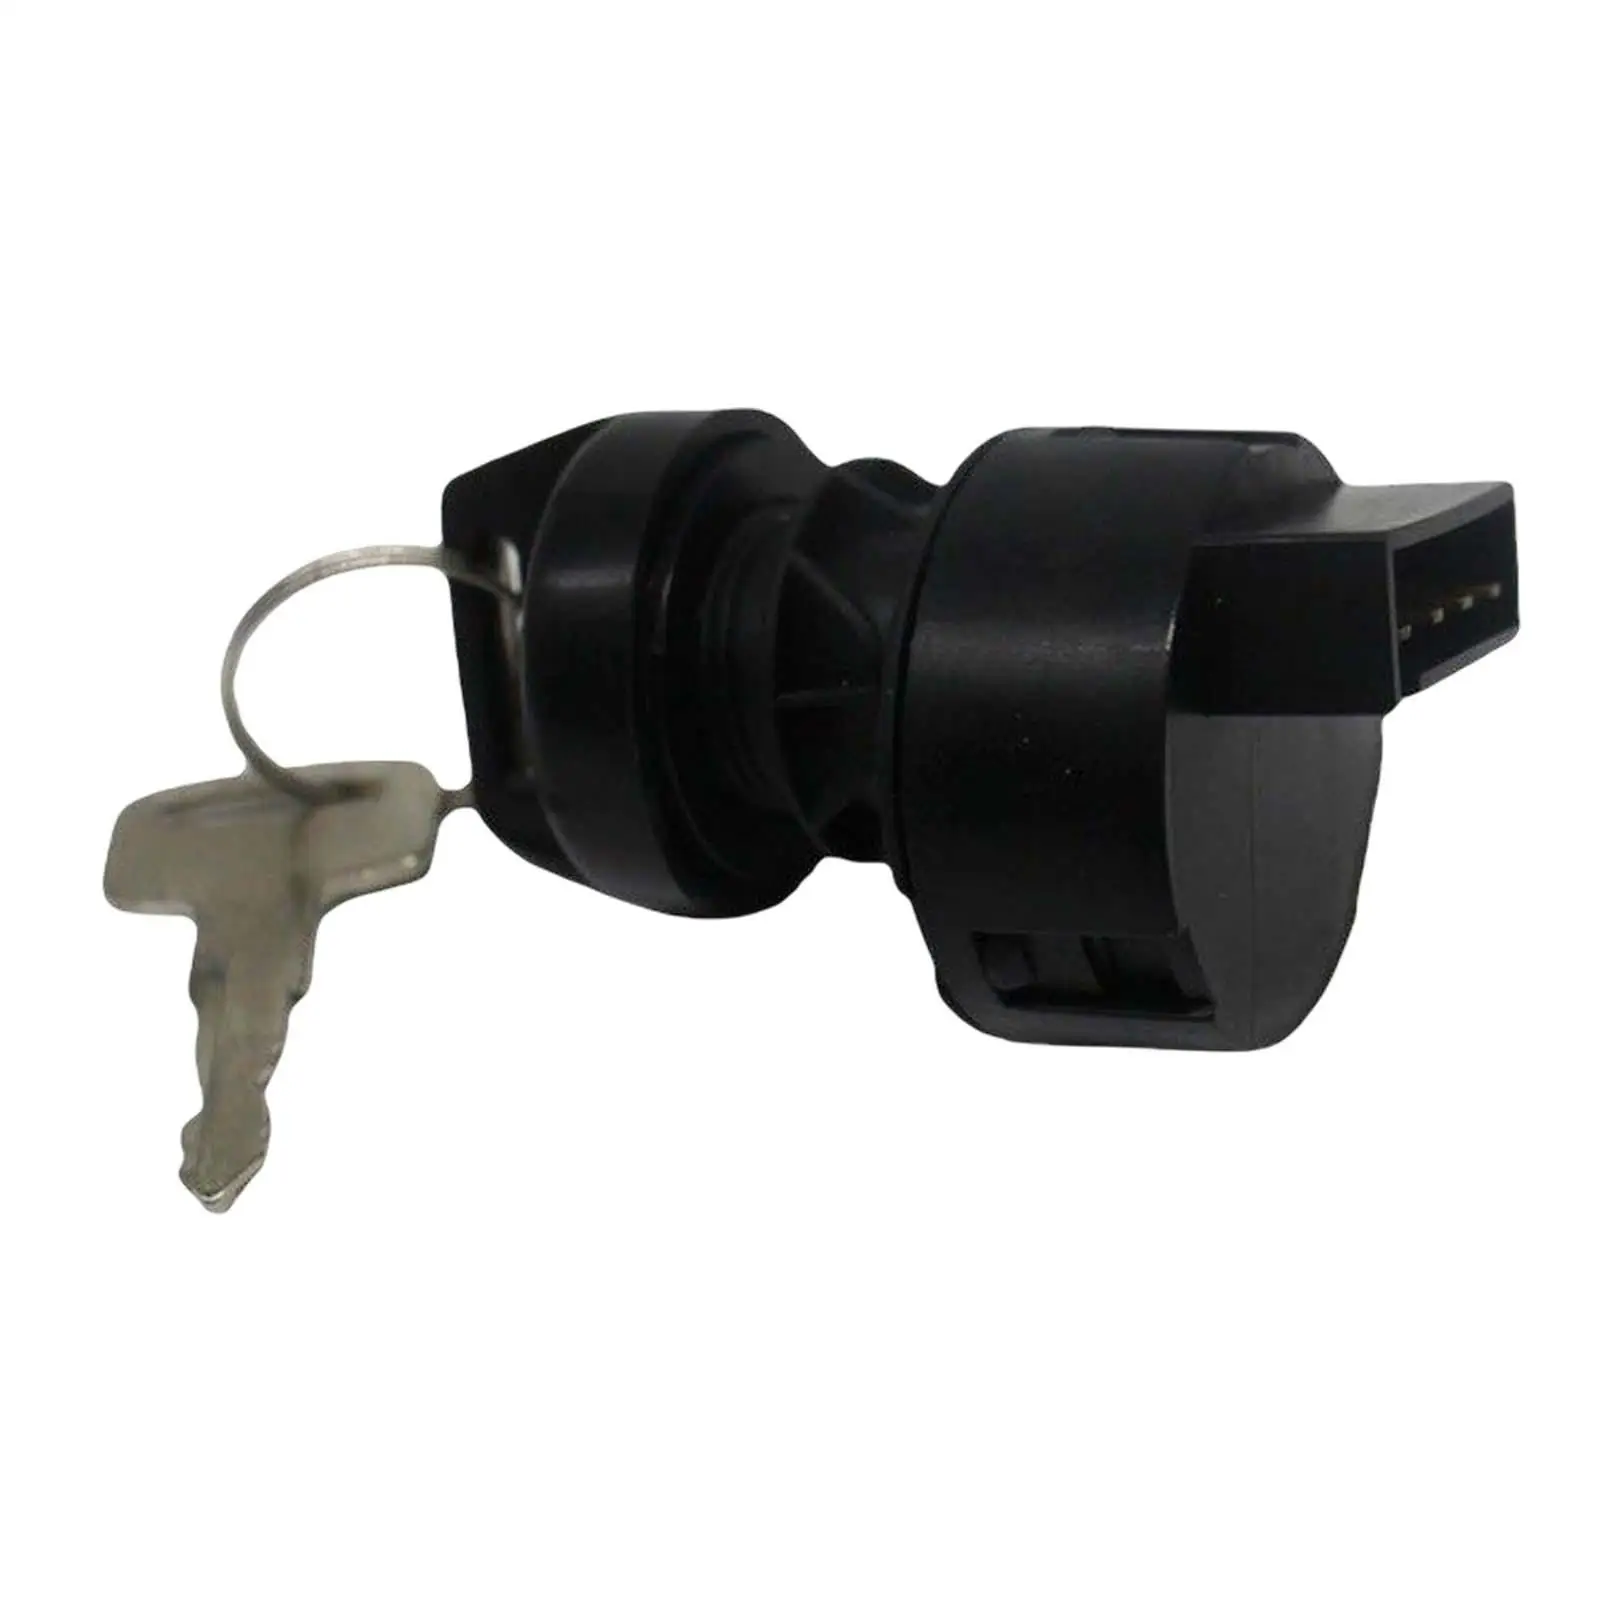 Ignition Switch Lock Spare Parts Accessory Black for Polaris Sportsman